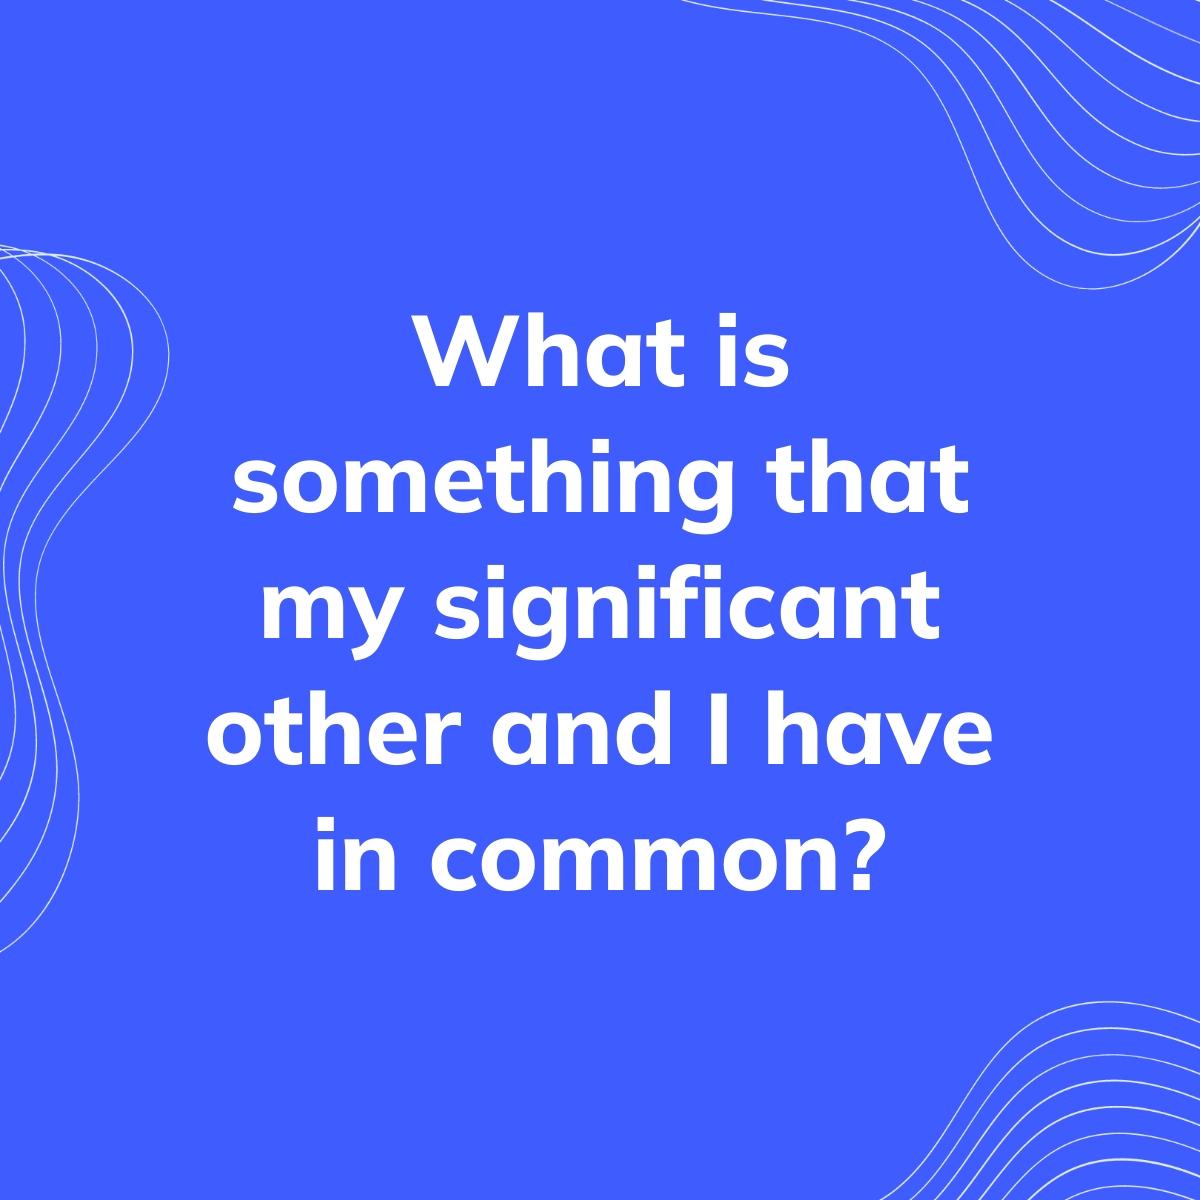 Journal Prompt: What is something that my significant other and I have in common?